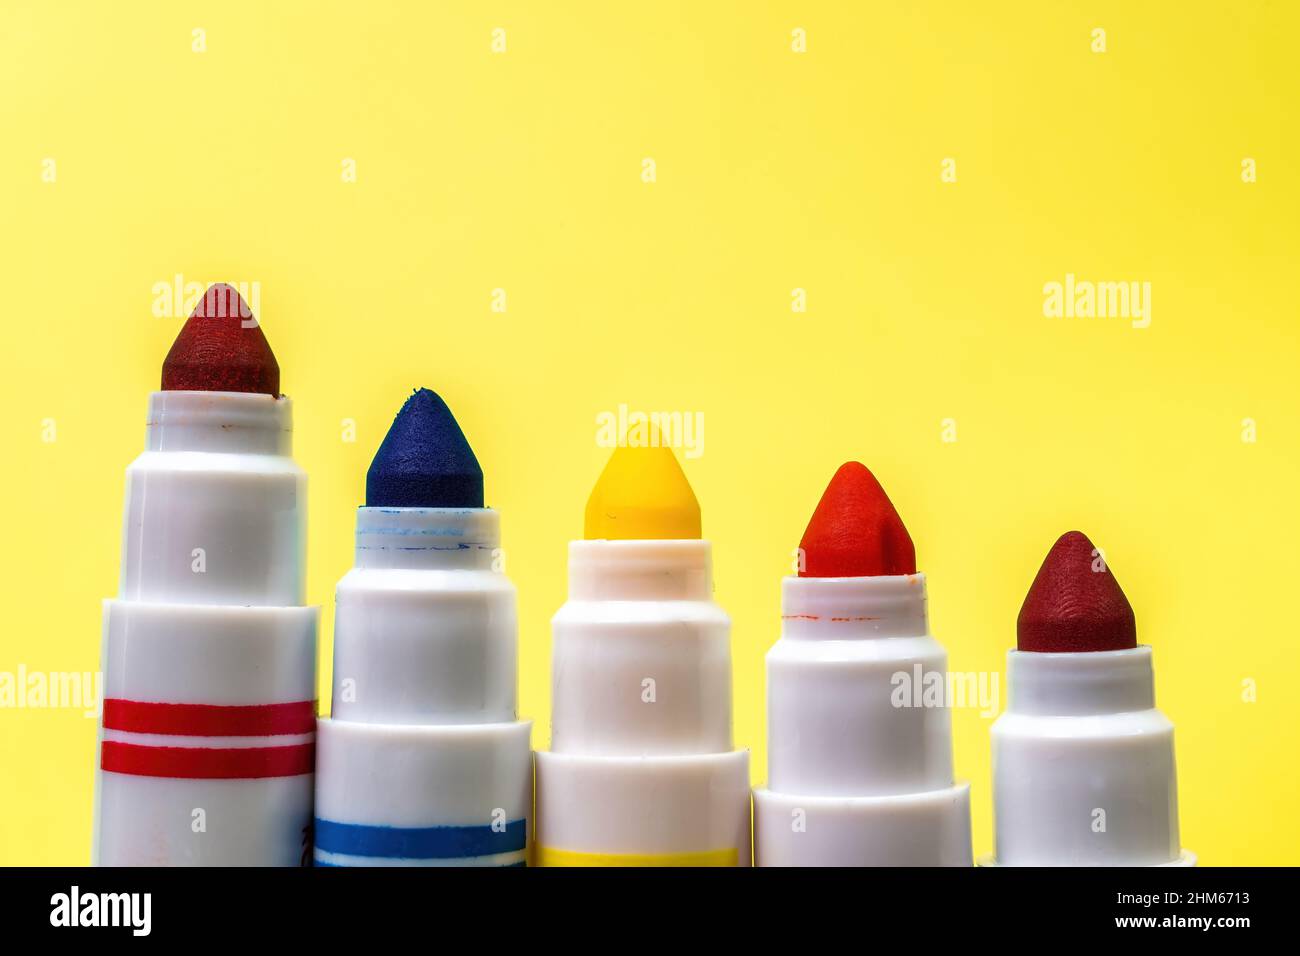 Colored markers on the white background Stock Photo by ©talevr 132717746